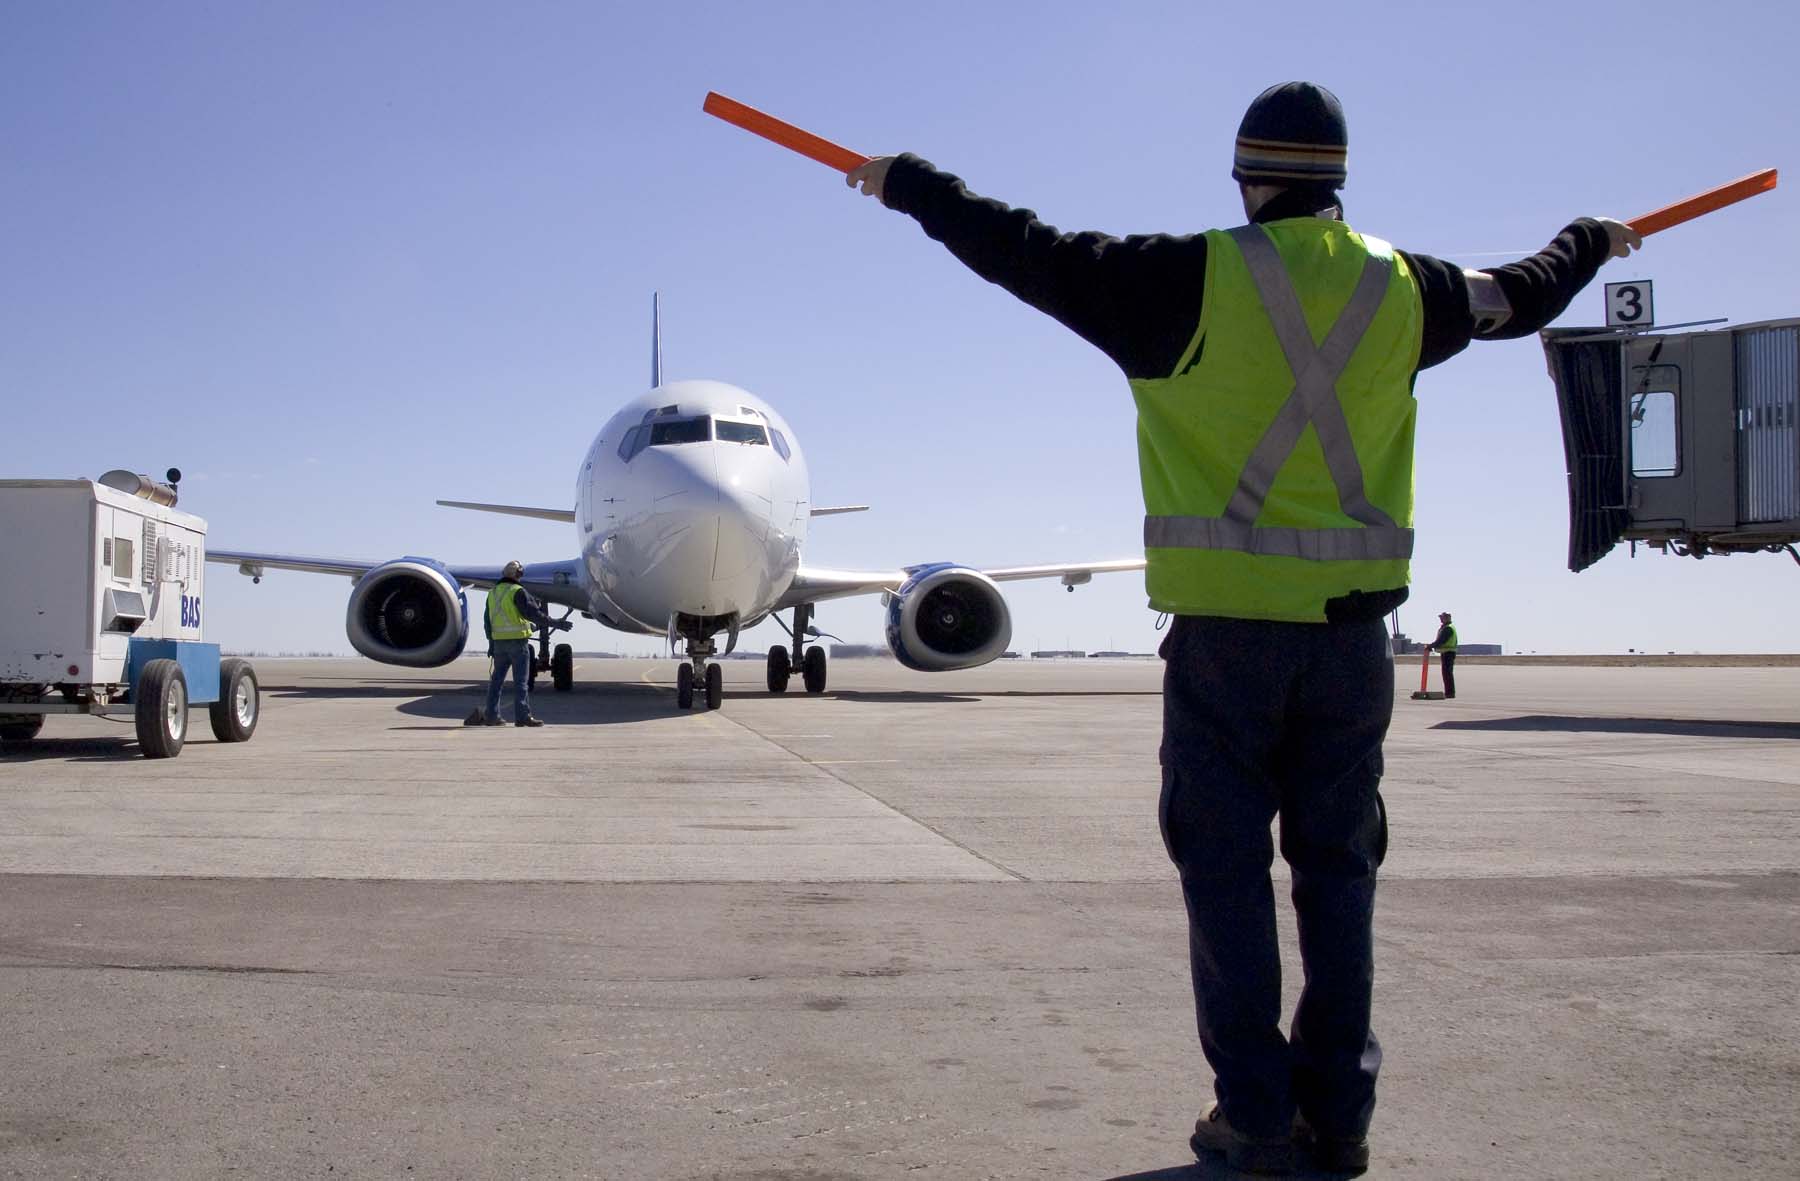 A ground control technician is guiding a mid-sized plane into its terminal gate.